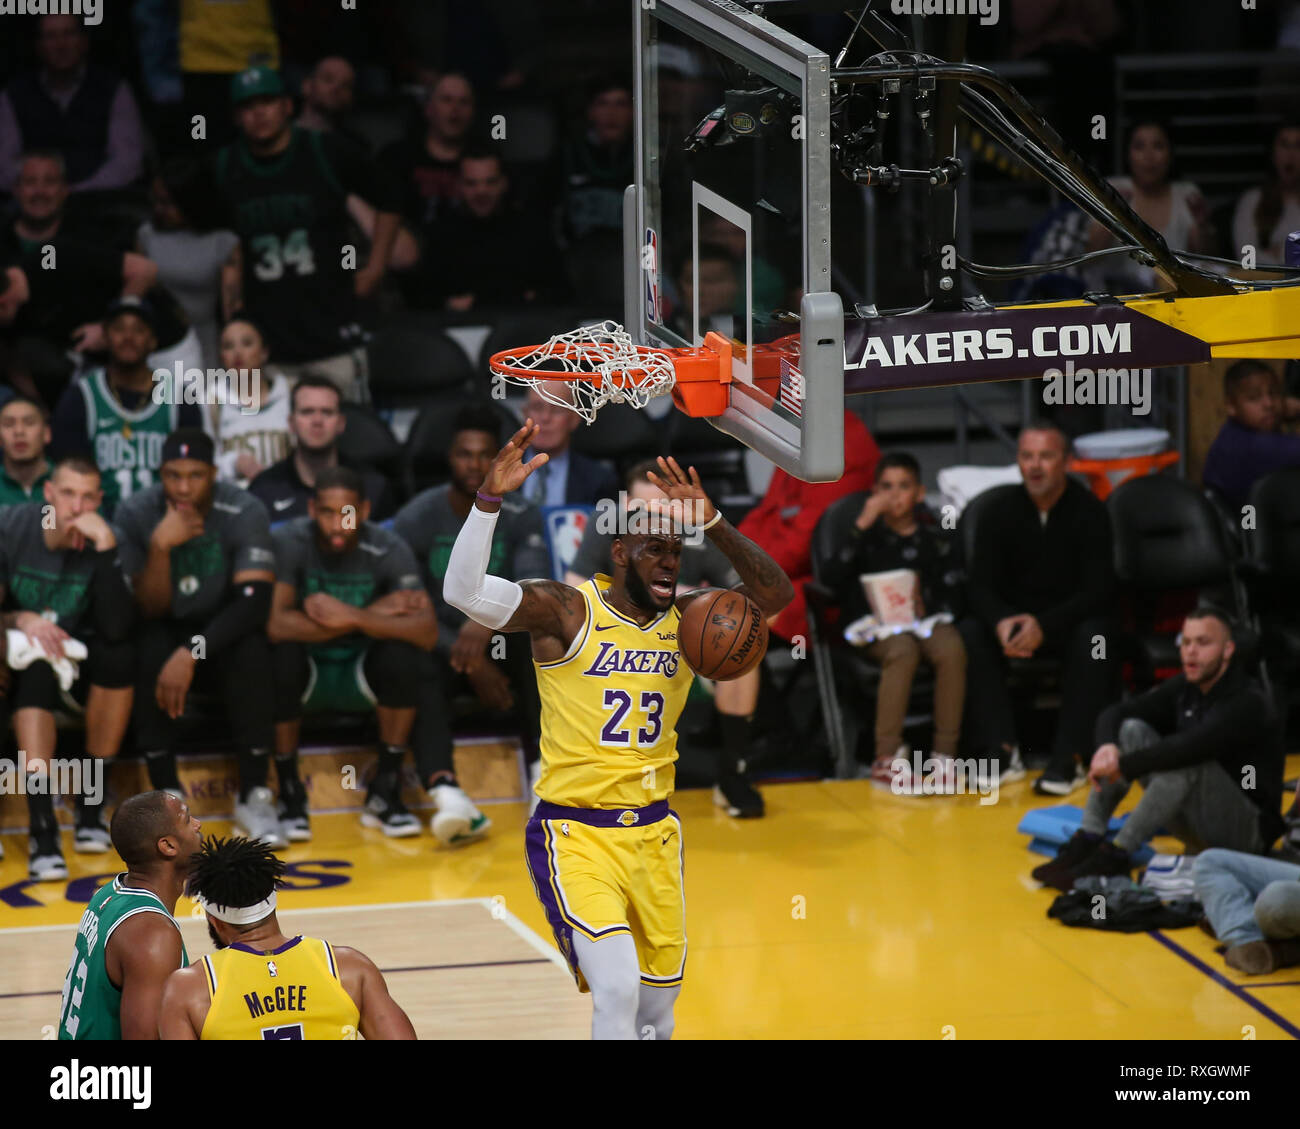 Los Angeles Lakers forward LeBron James #23 yells on a dunk during the Boston Celtics vs Los Angeles Lakers game at Staples Center in Los Angeles, CA on March 09, 2019. (Photo by Jevone Moore) Stock Photo